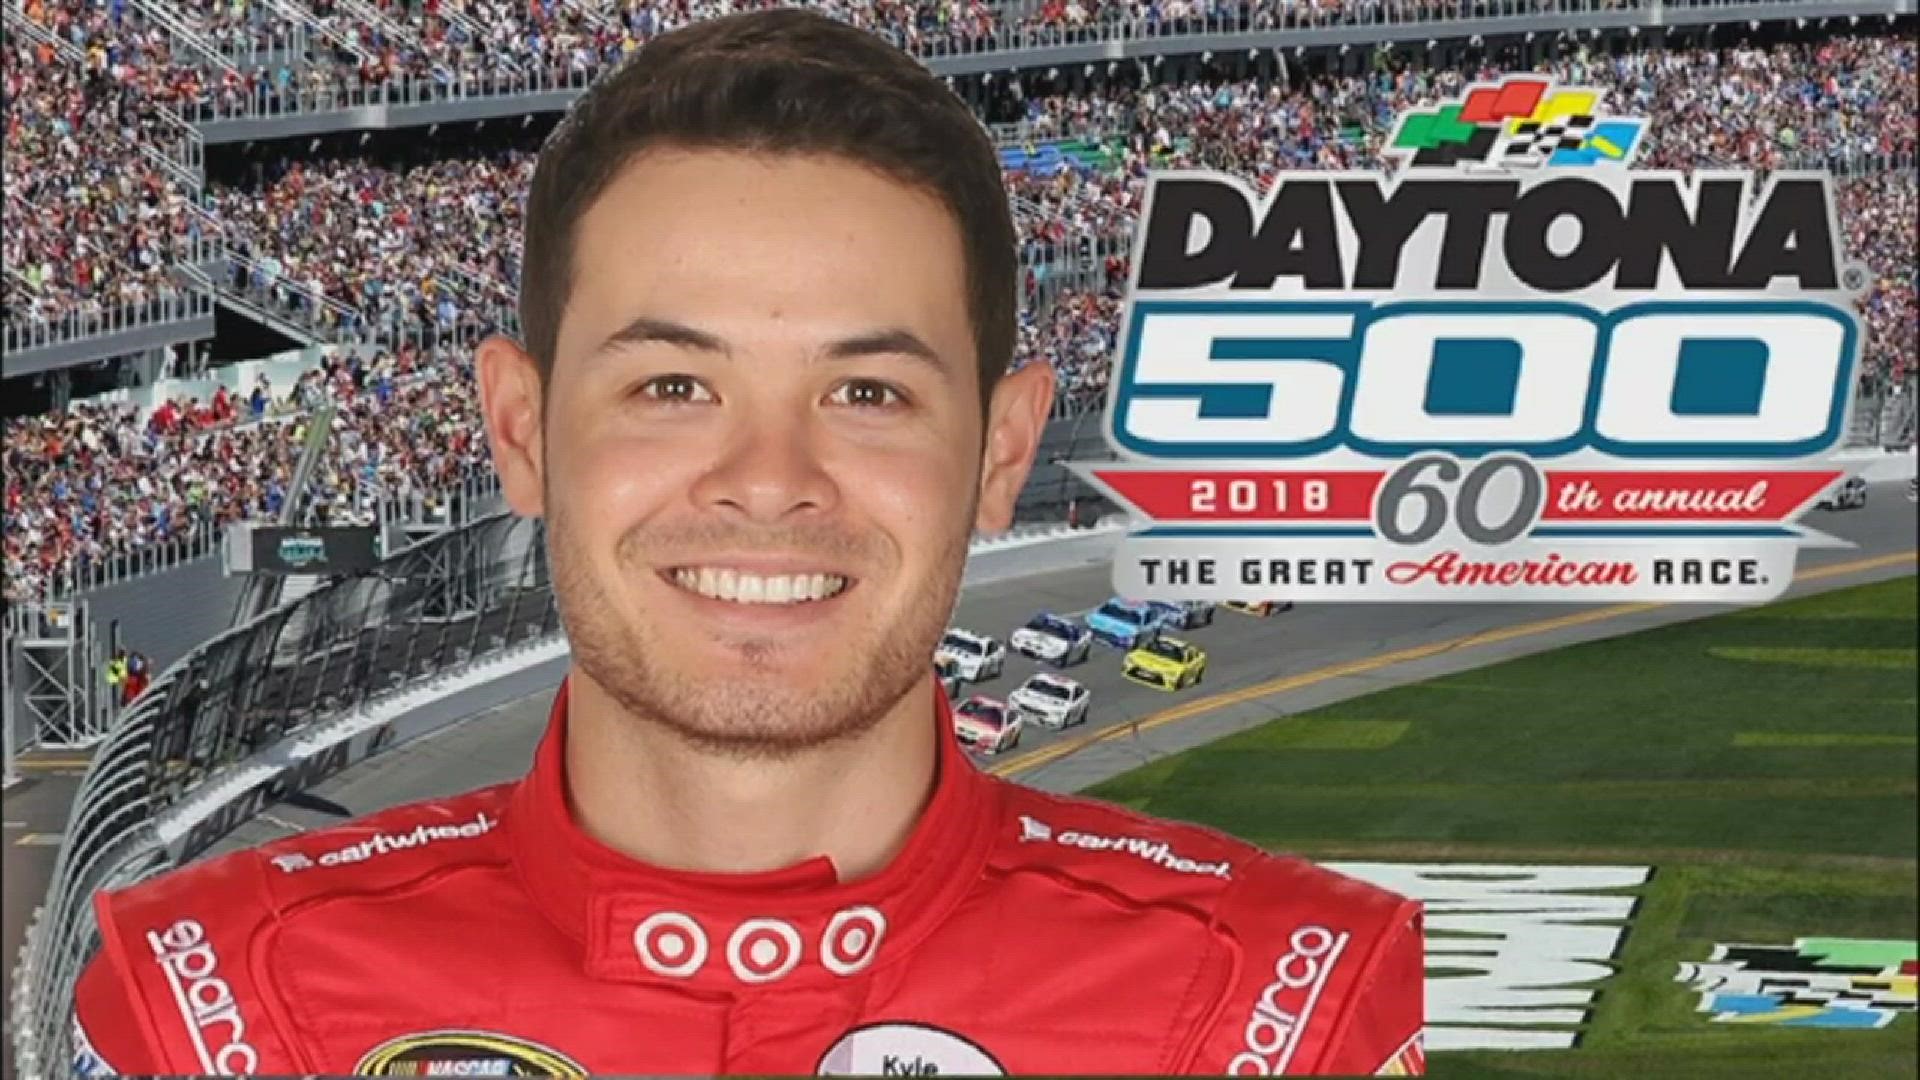 Elk Grove native Kyle Larson, driver of the No. 42 NASCAR Cup Car, talks to ABC10's Lina Washington about this weekend's Daytona 500 and the season ahead for him.